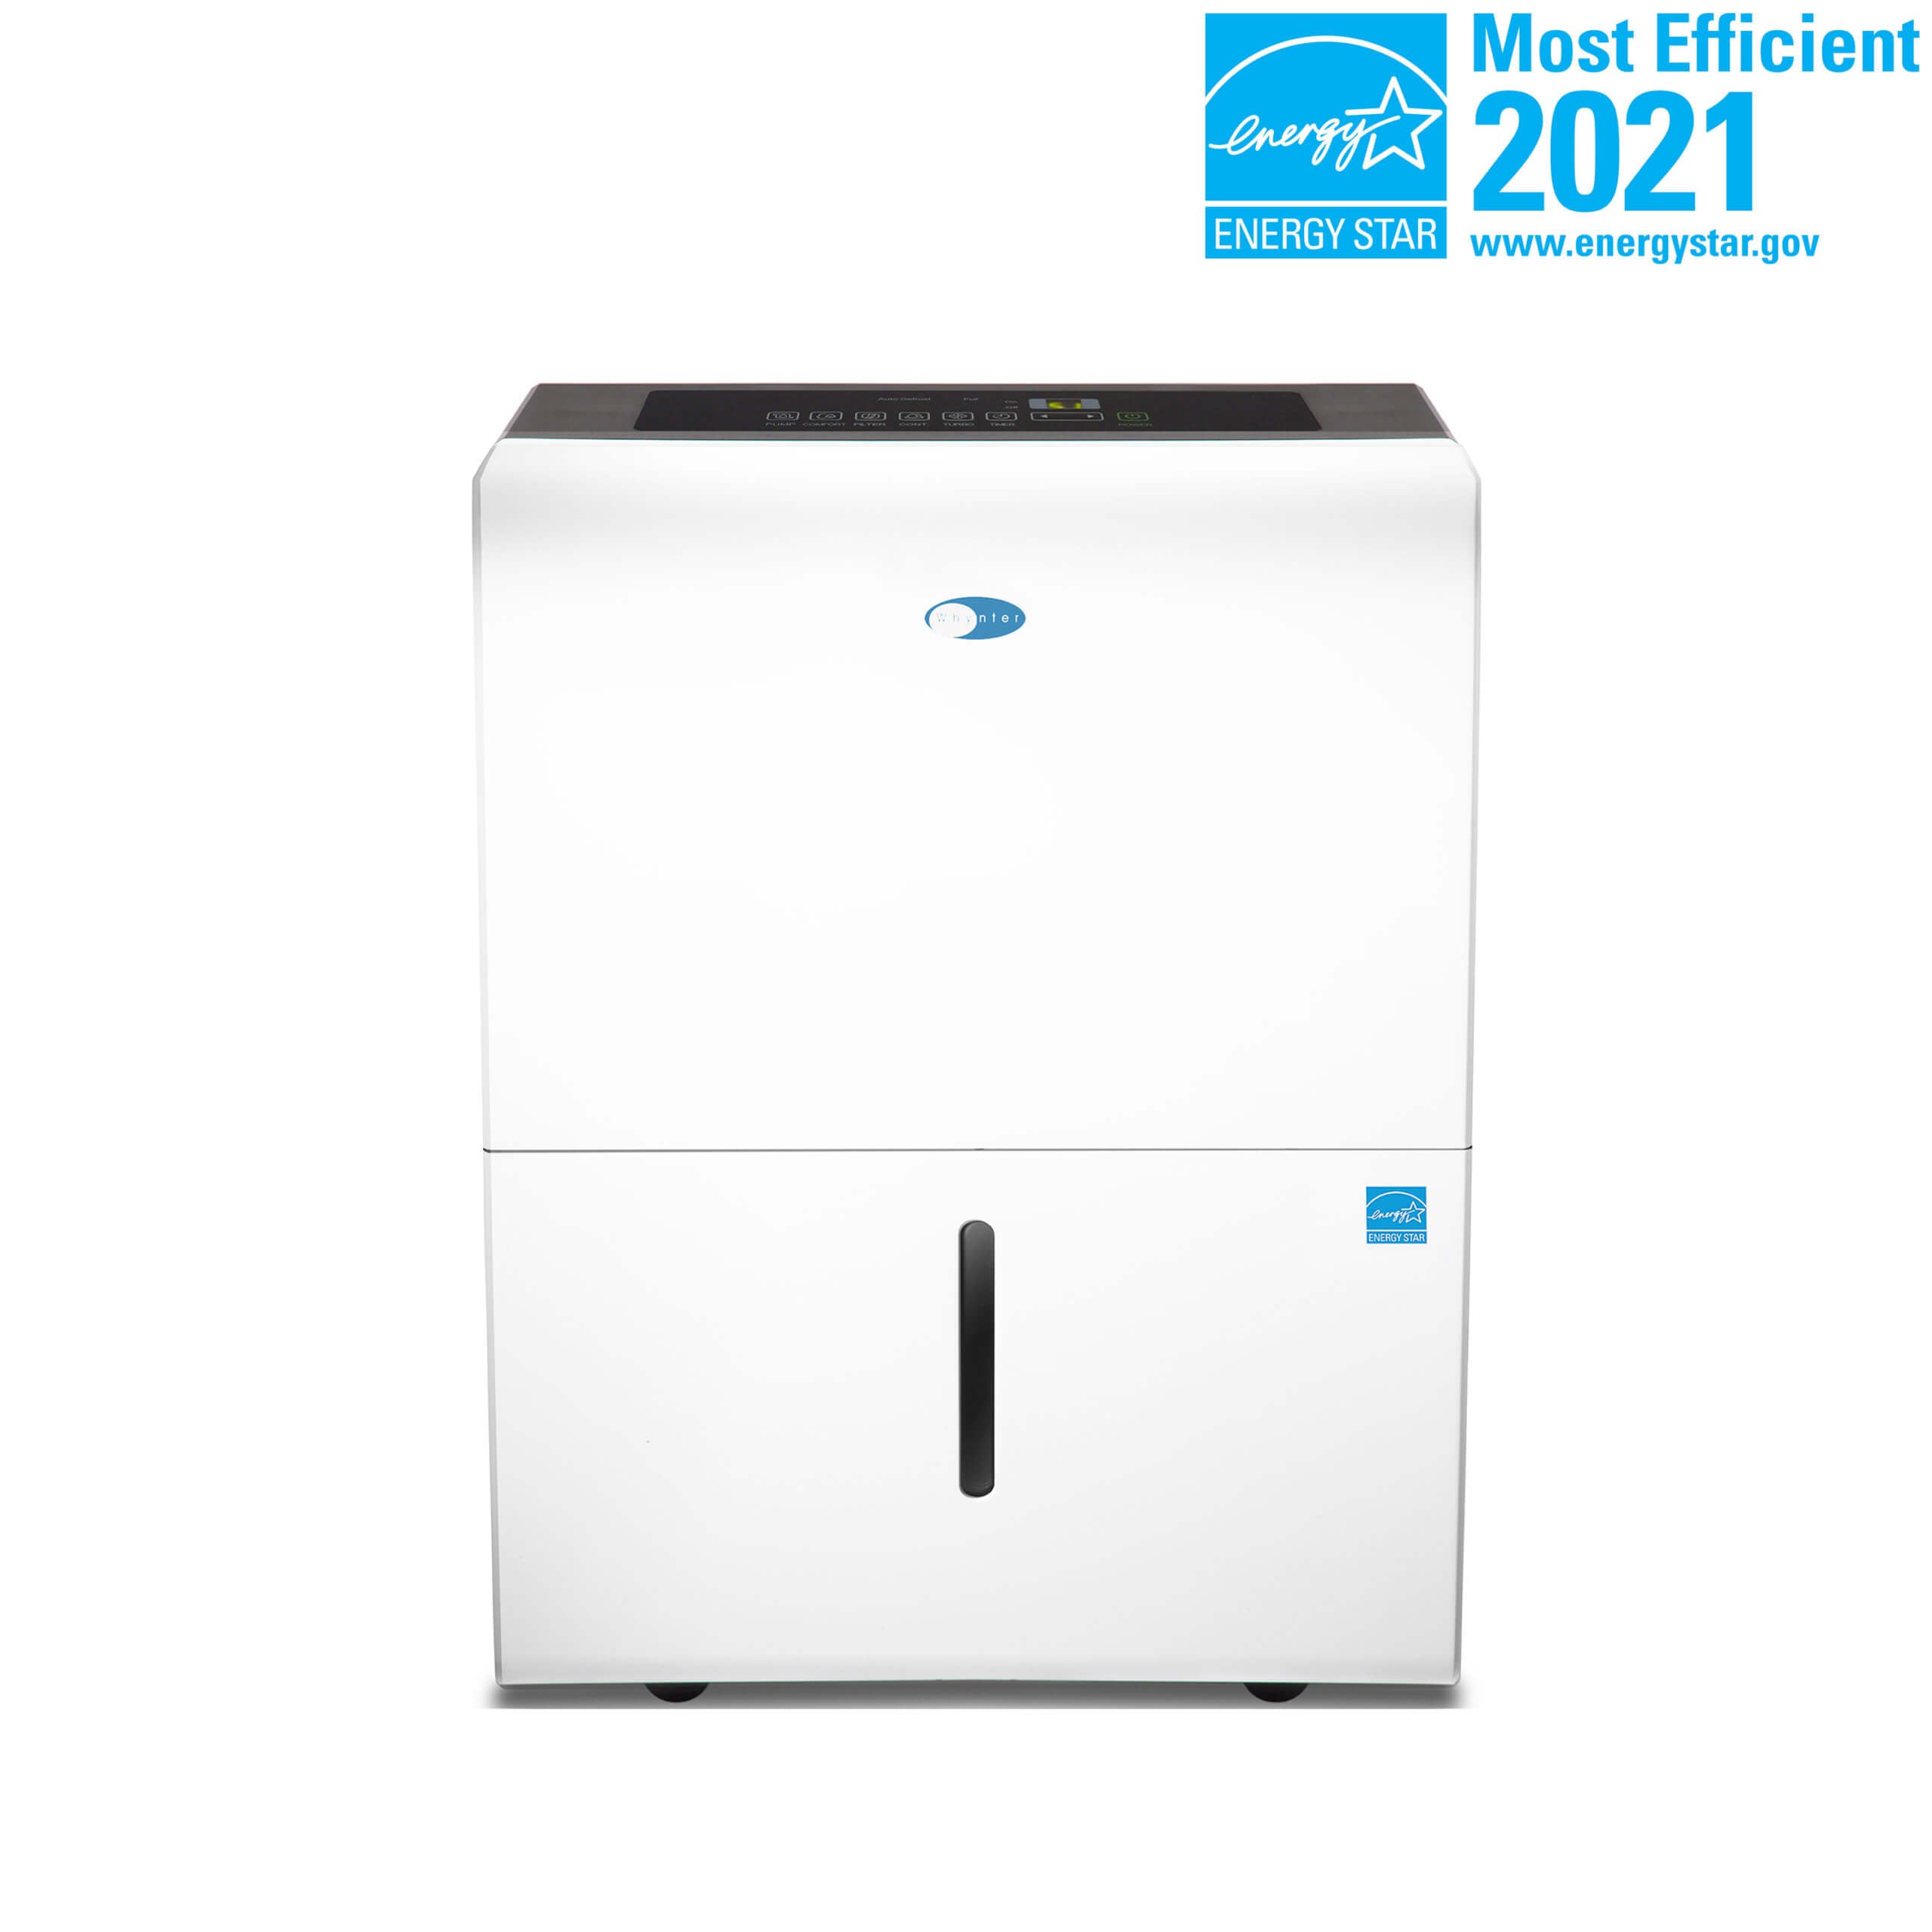 Whynter RPD-506EWP ENERGY STAR Most Efficient 2021 50 Pint High Capacity Portable Dehumidifier with Pump for up to 4000 sq ft